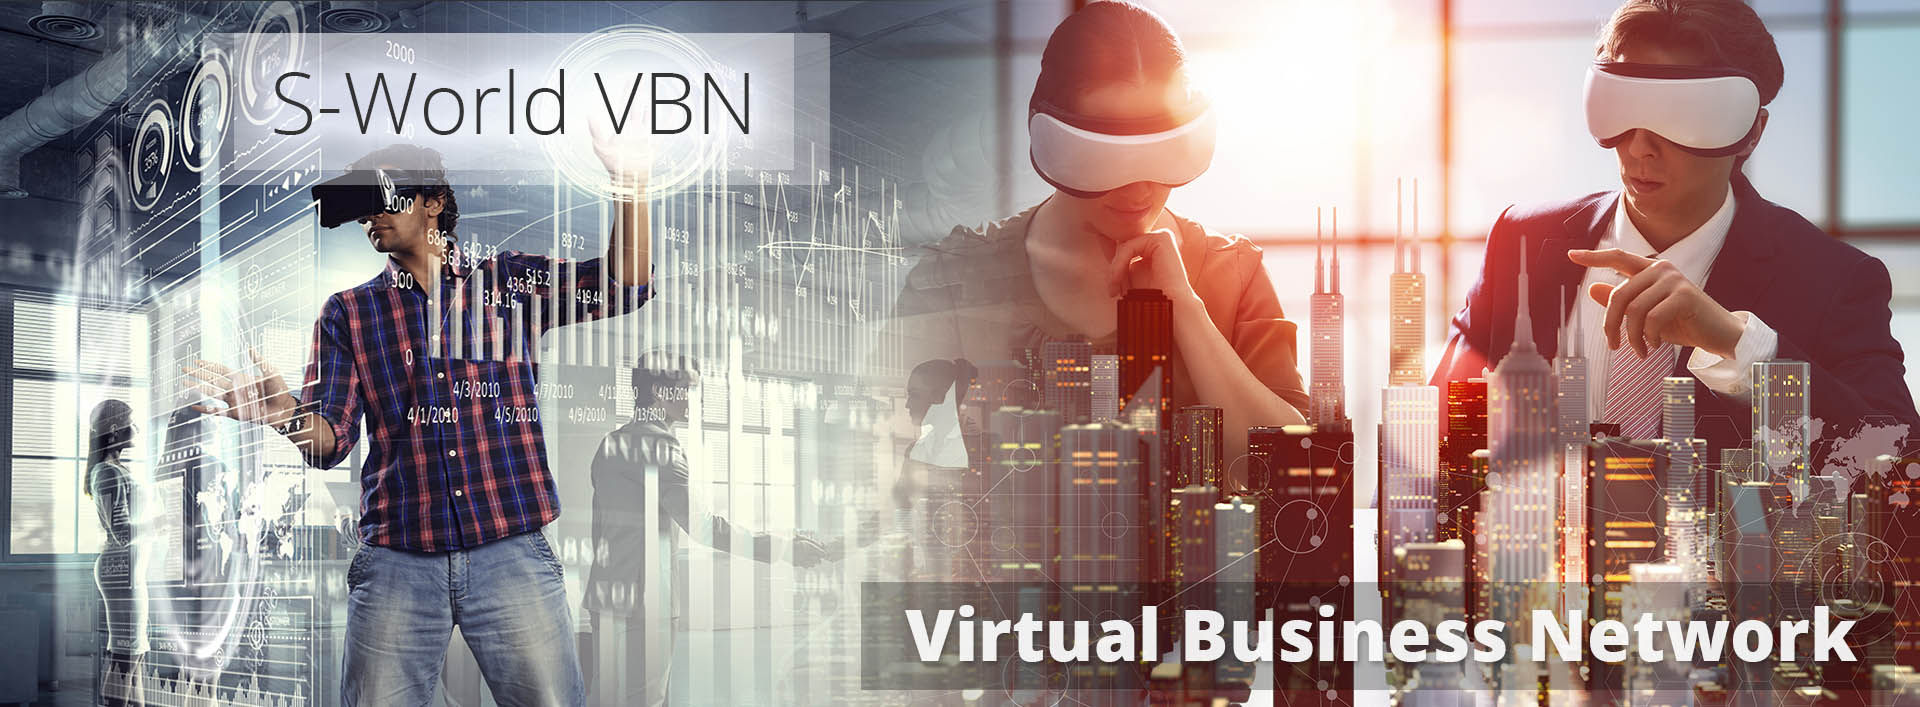 S-World VBN (Virtual Business Network)